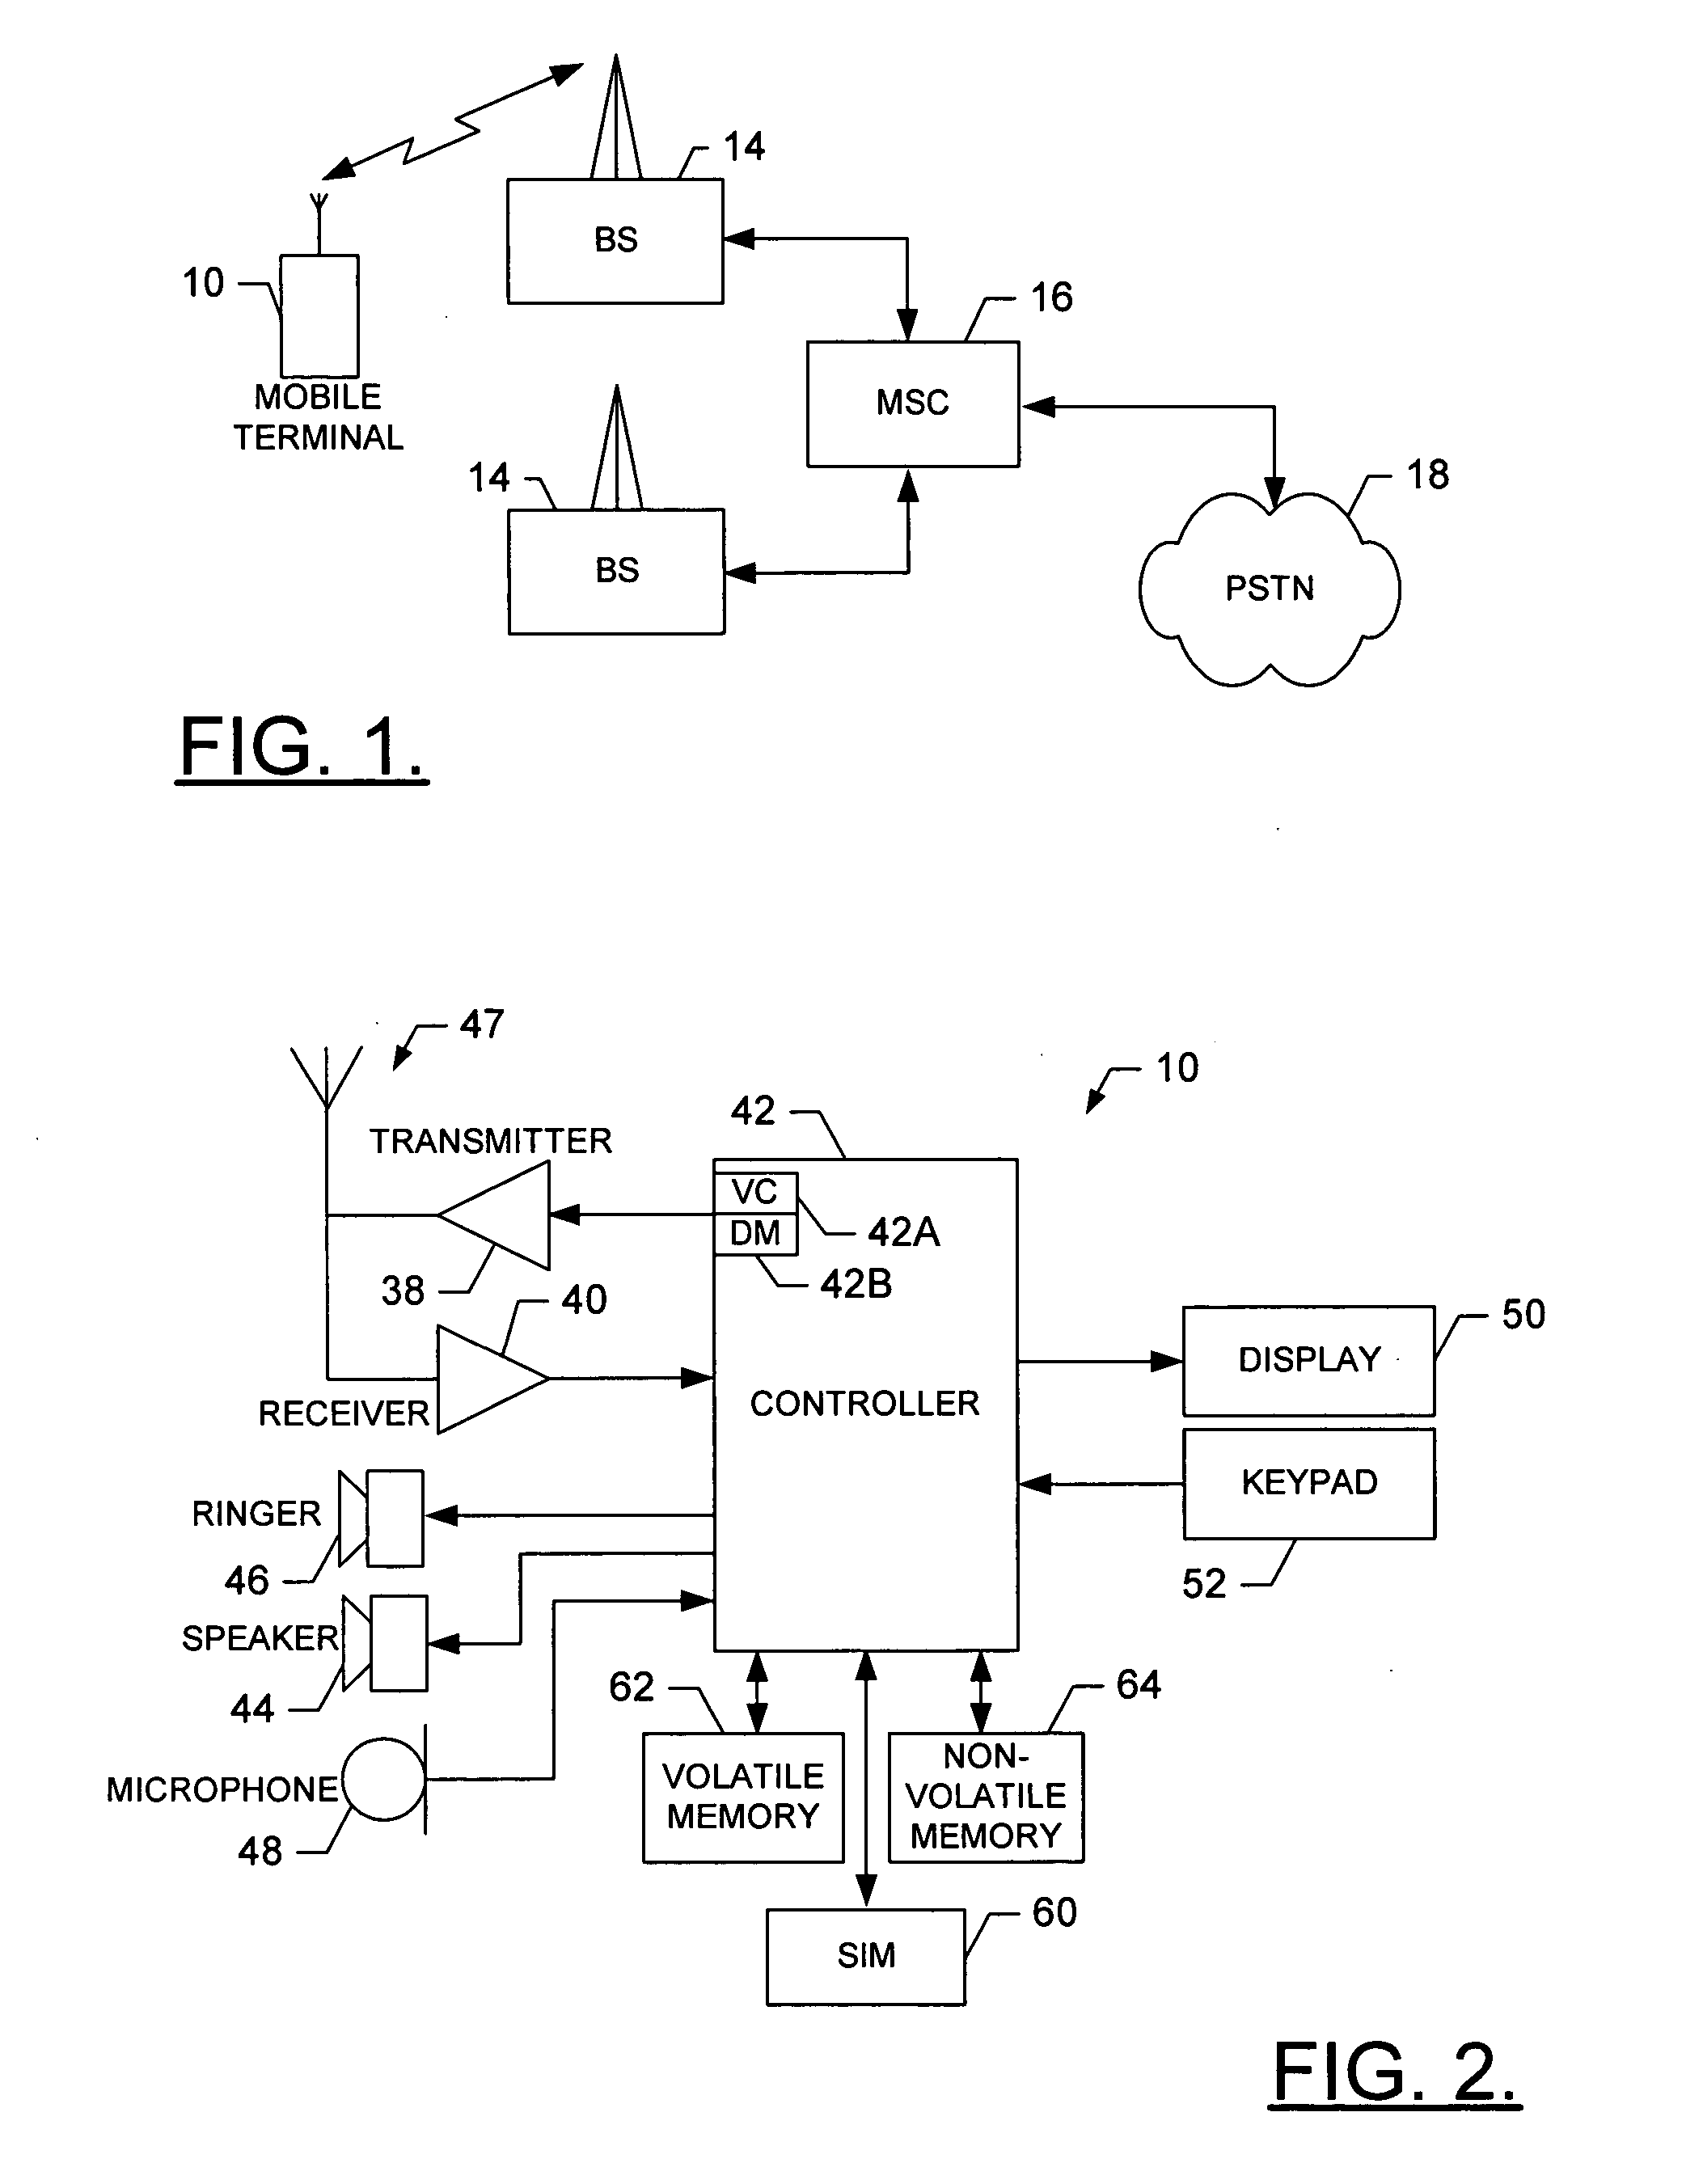 Mobile terminal, method and computer program product for storing and retrieving network parameters